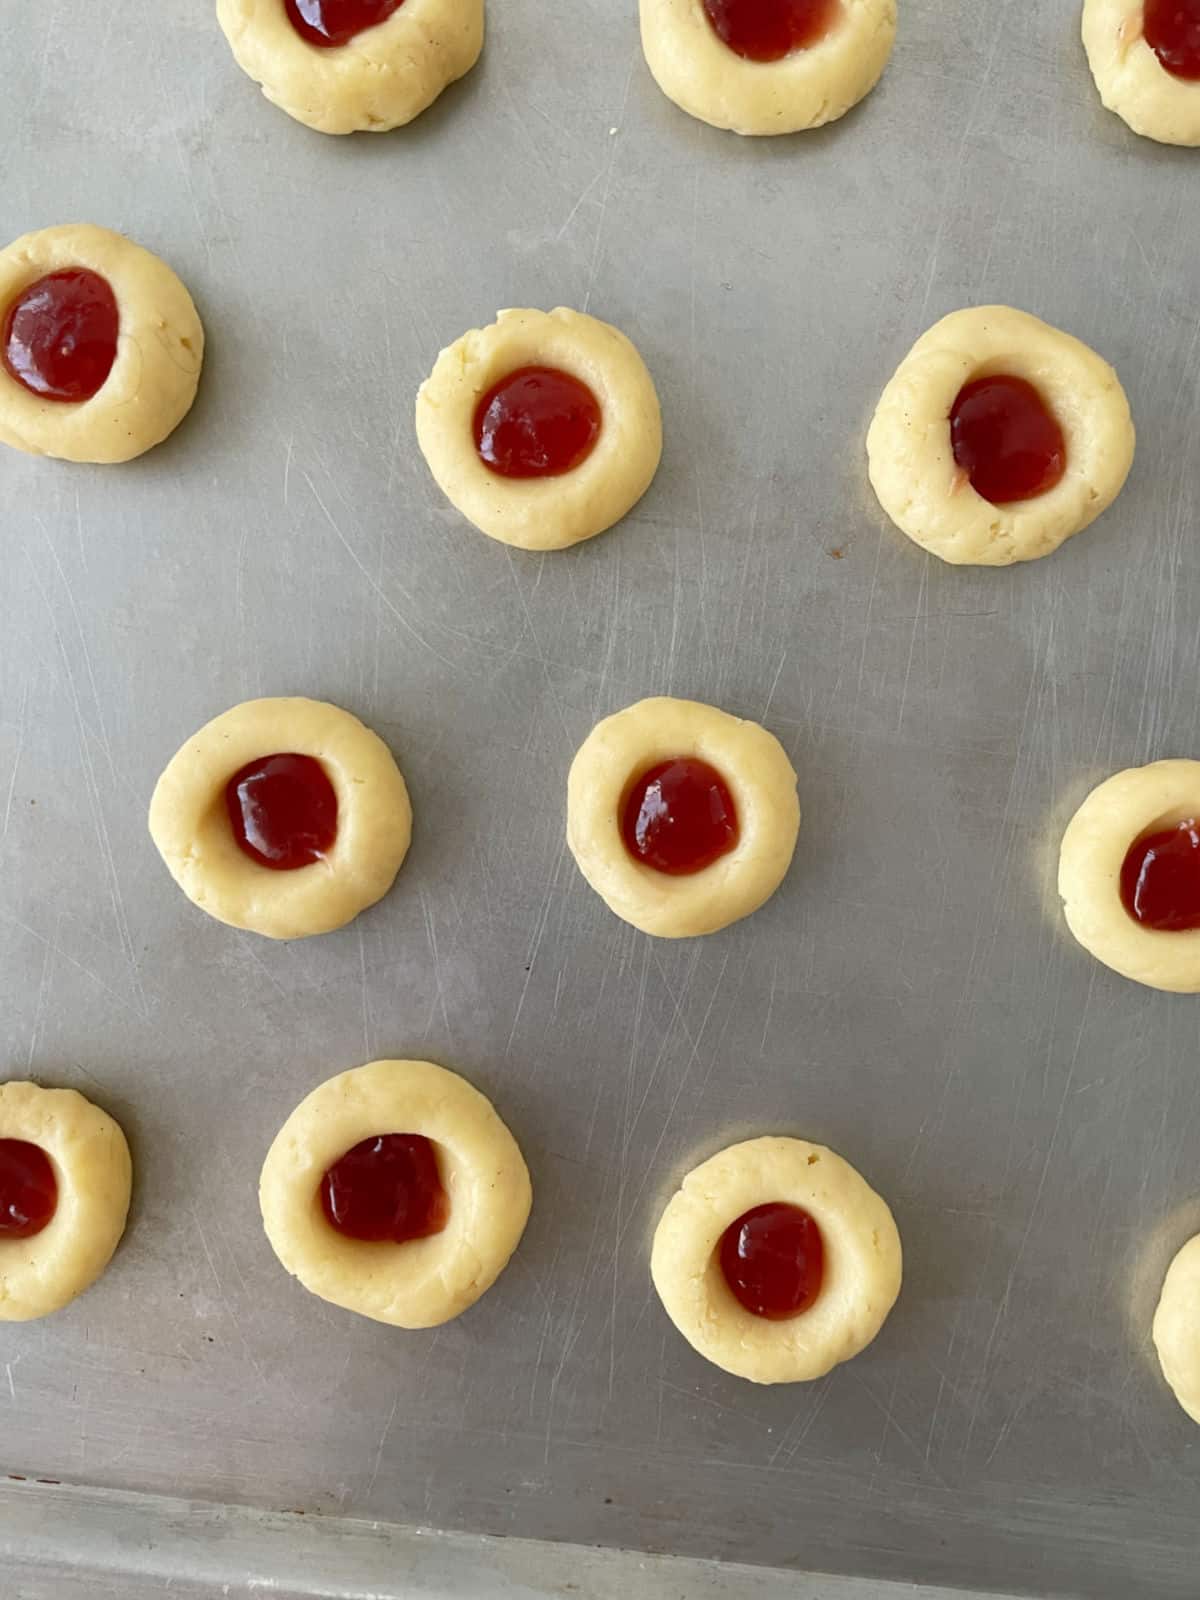 Top view of several jam filled unbaked thumbprint cookies on a metal cookie sheet.